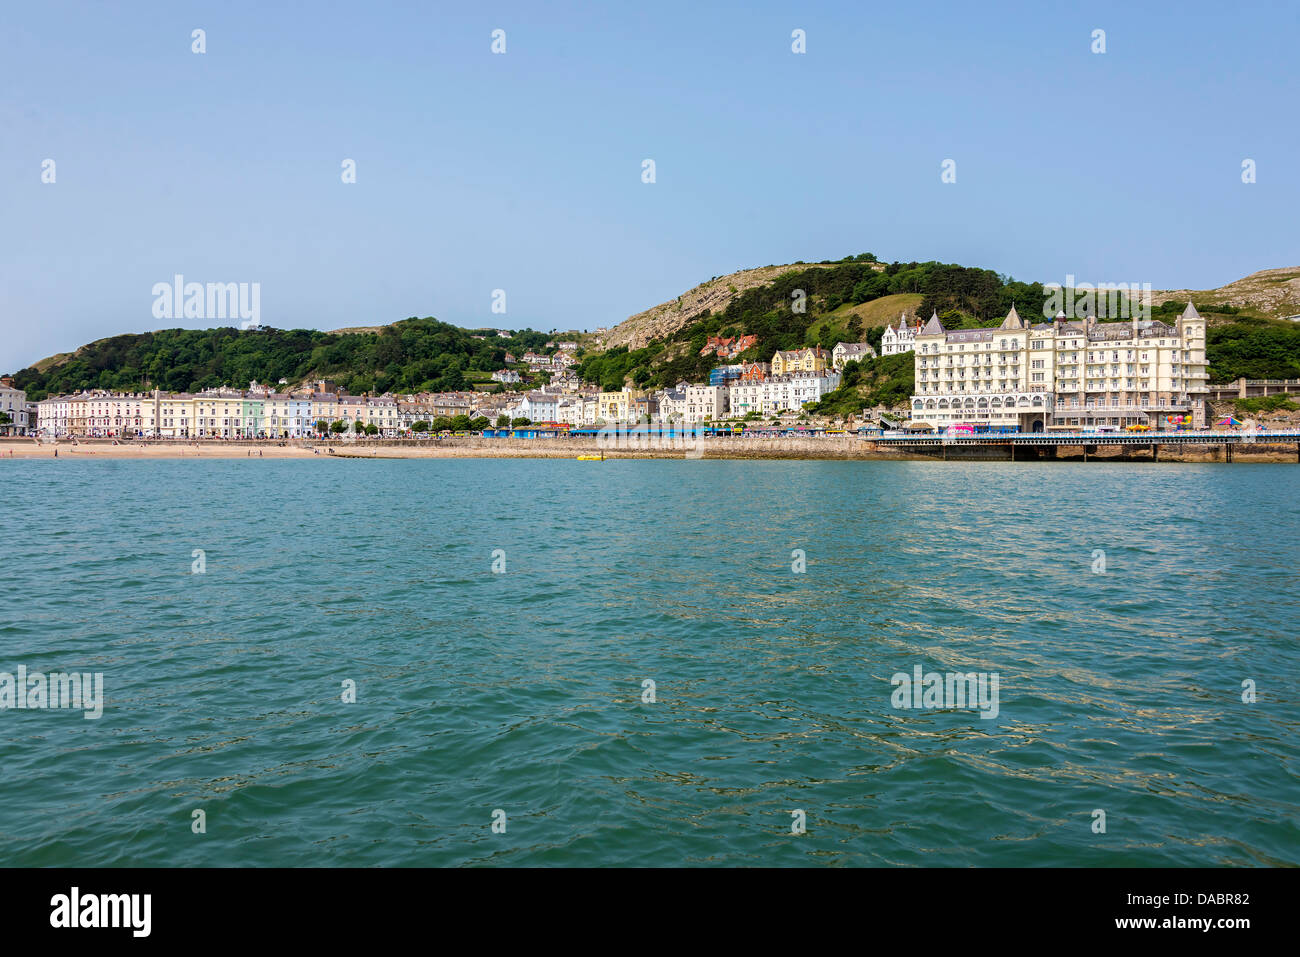 Llandudno pier and the Great Orme on the North Bay of the North Wales seaside town. Stock Photo